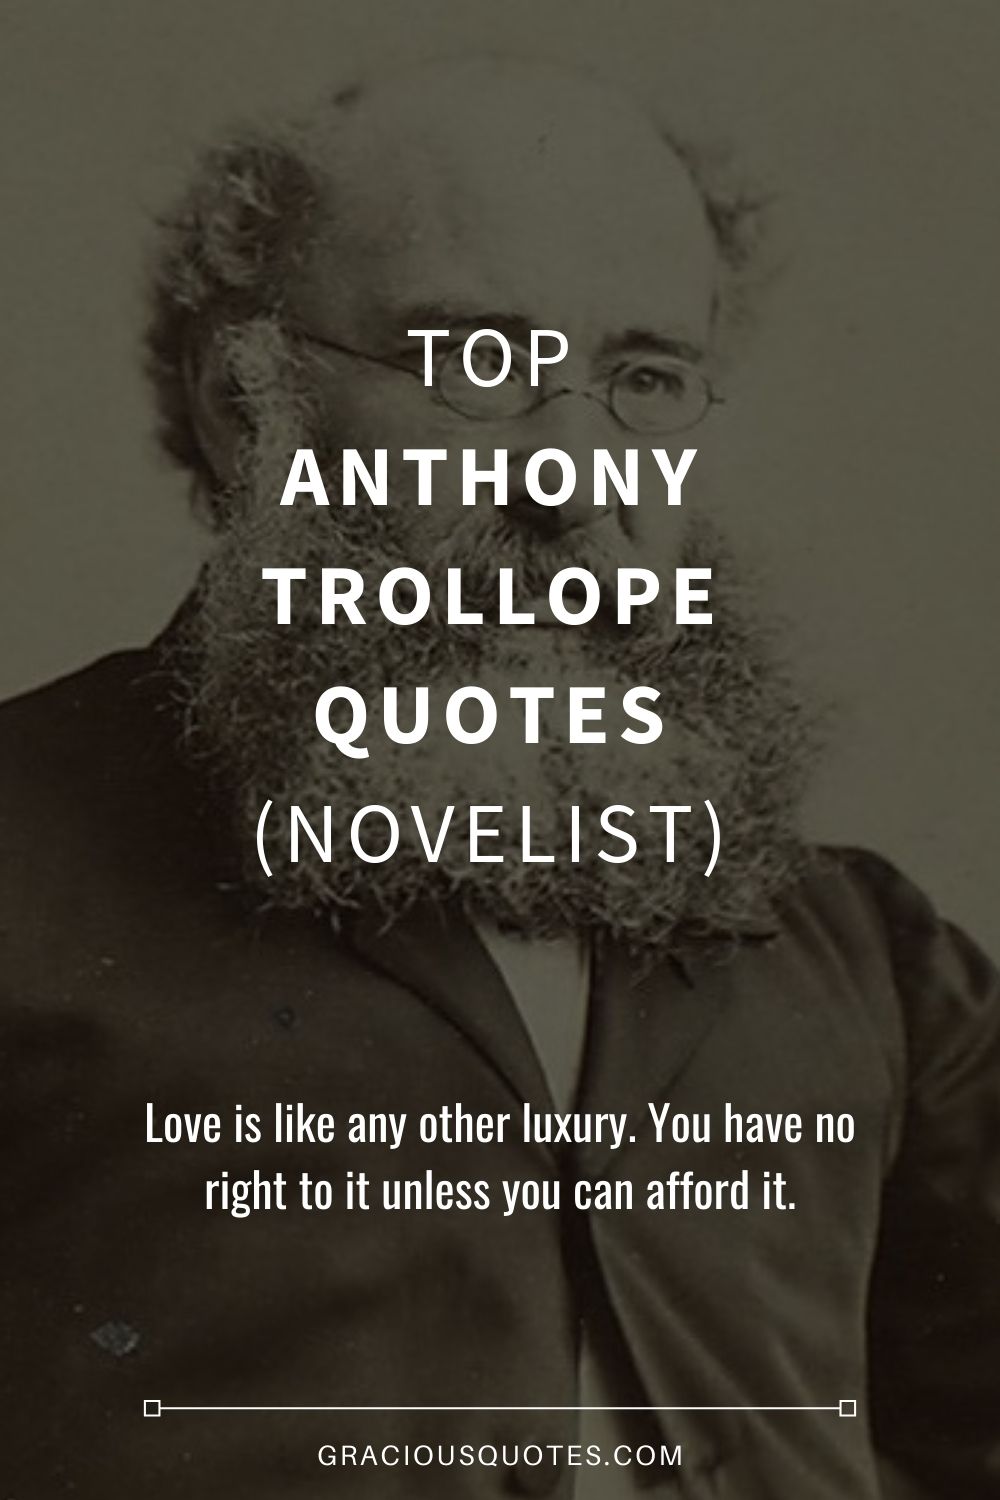 Top Anthony Trollope Quotes (NOVELIST) - Gracious Quotes